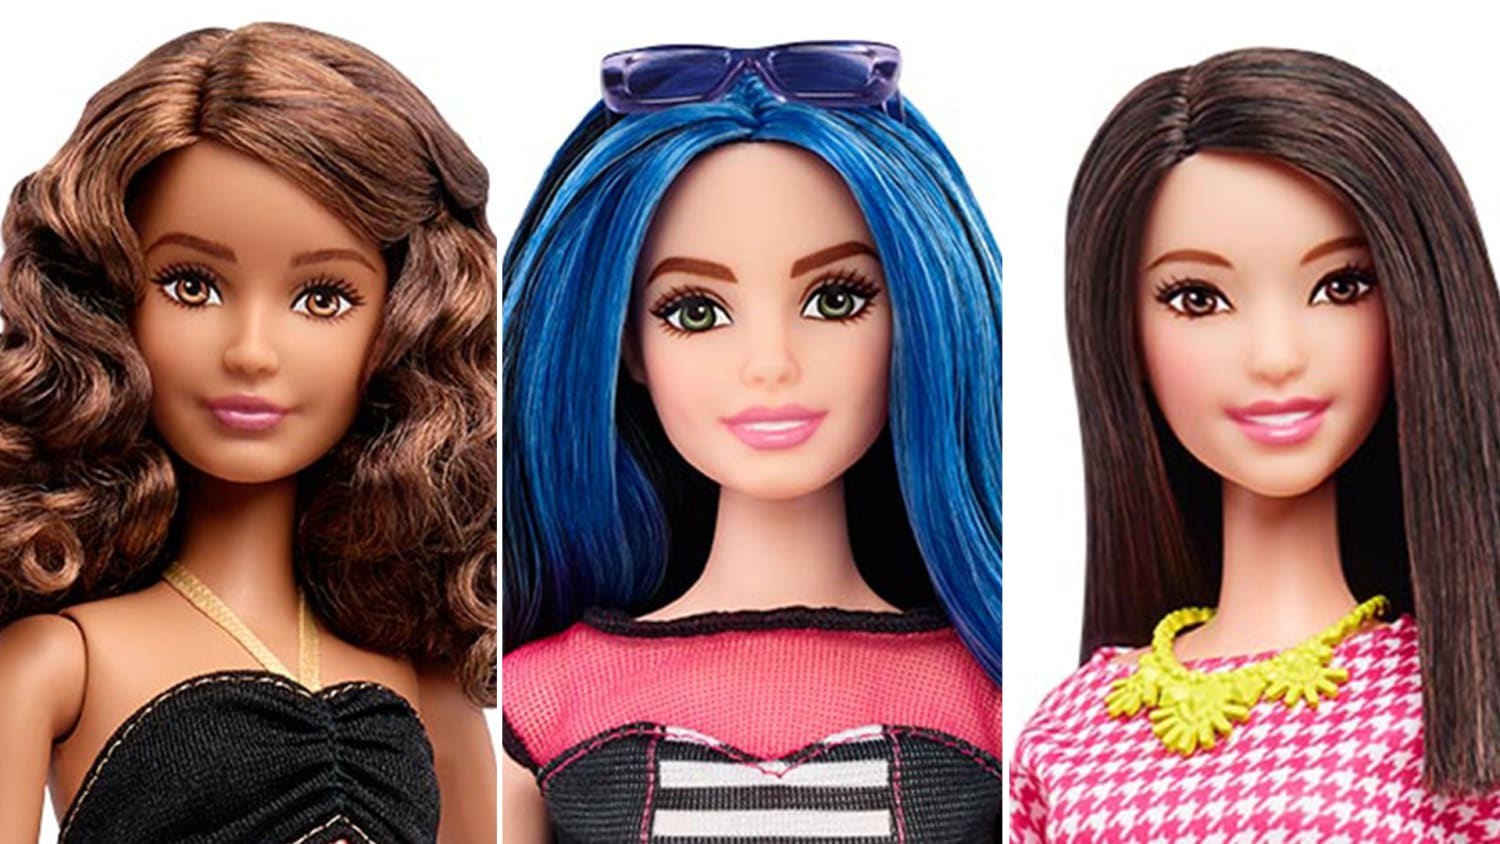 Vaardigheid Persona halfrond Barbie unveils new dolls with curvy, tall and petite body types